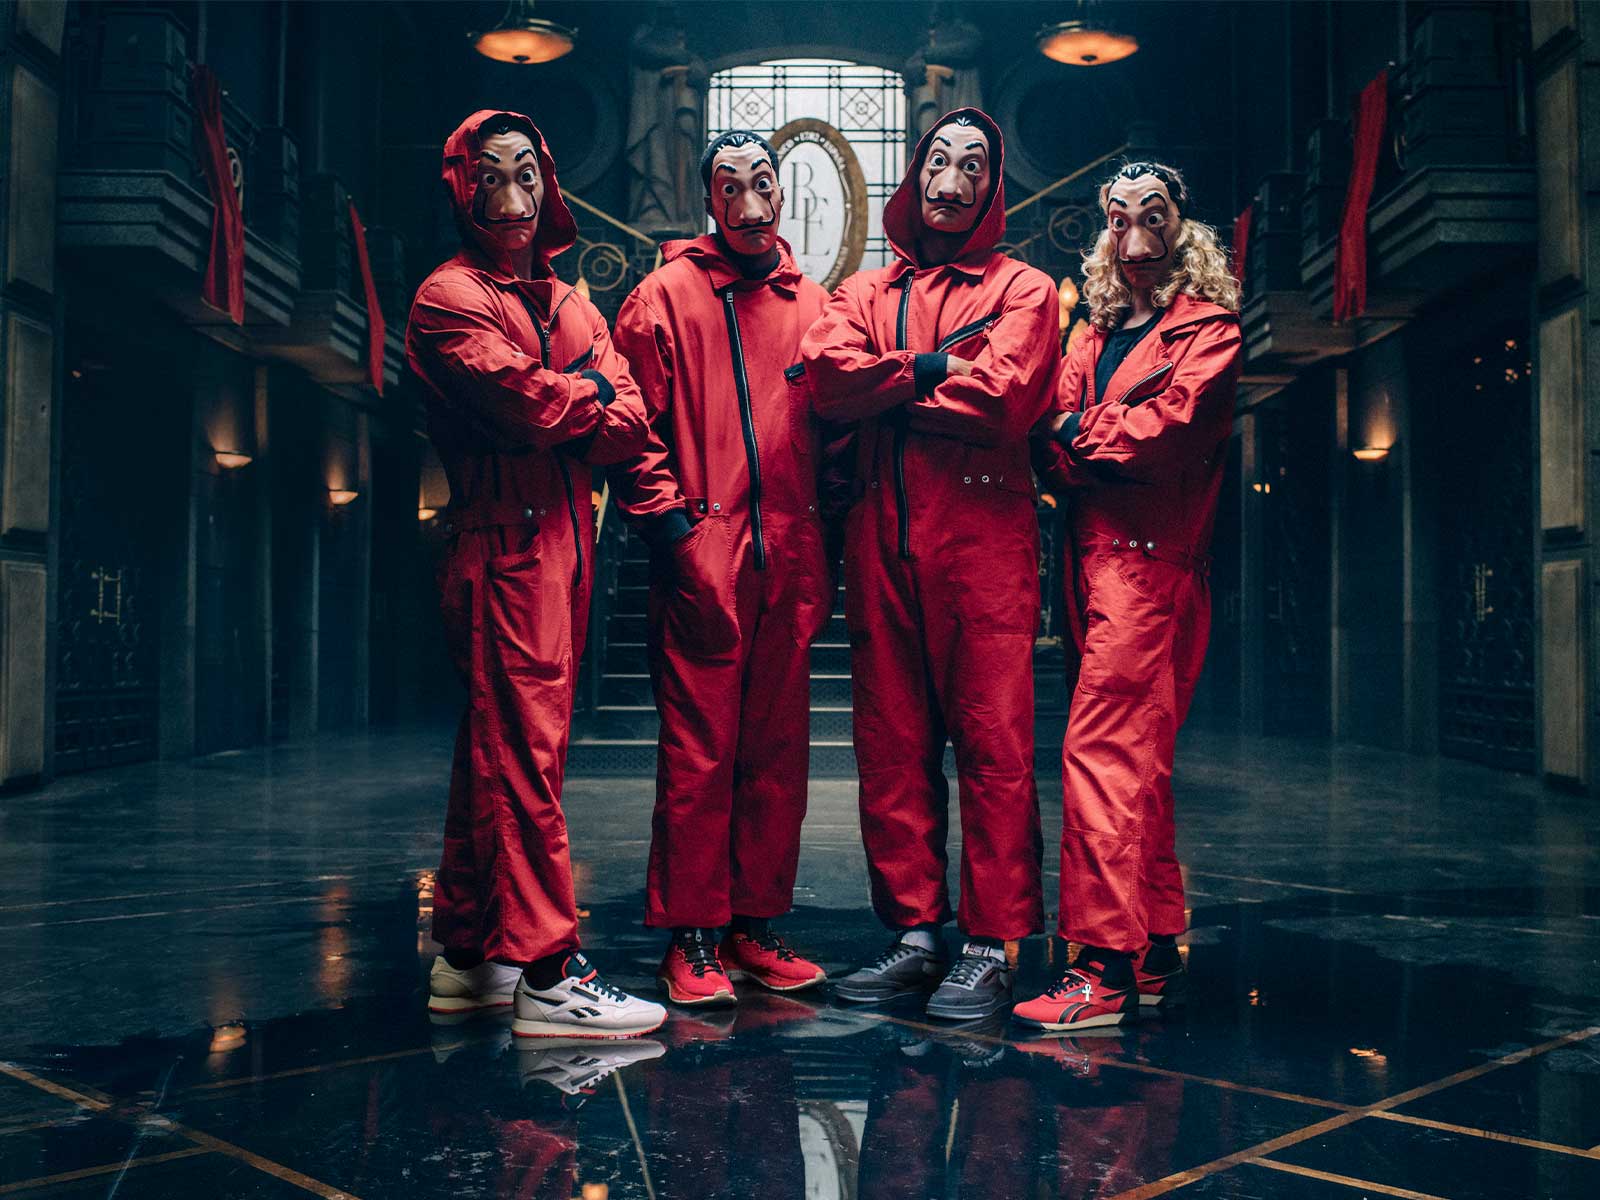 Join the resistance with the La Casa de Papel collection by Reebok and Netflix